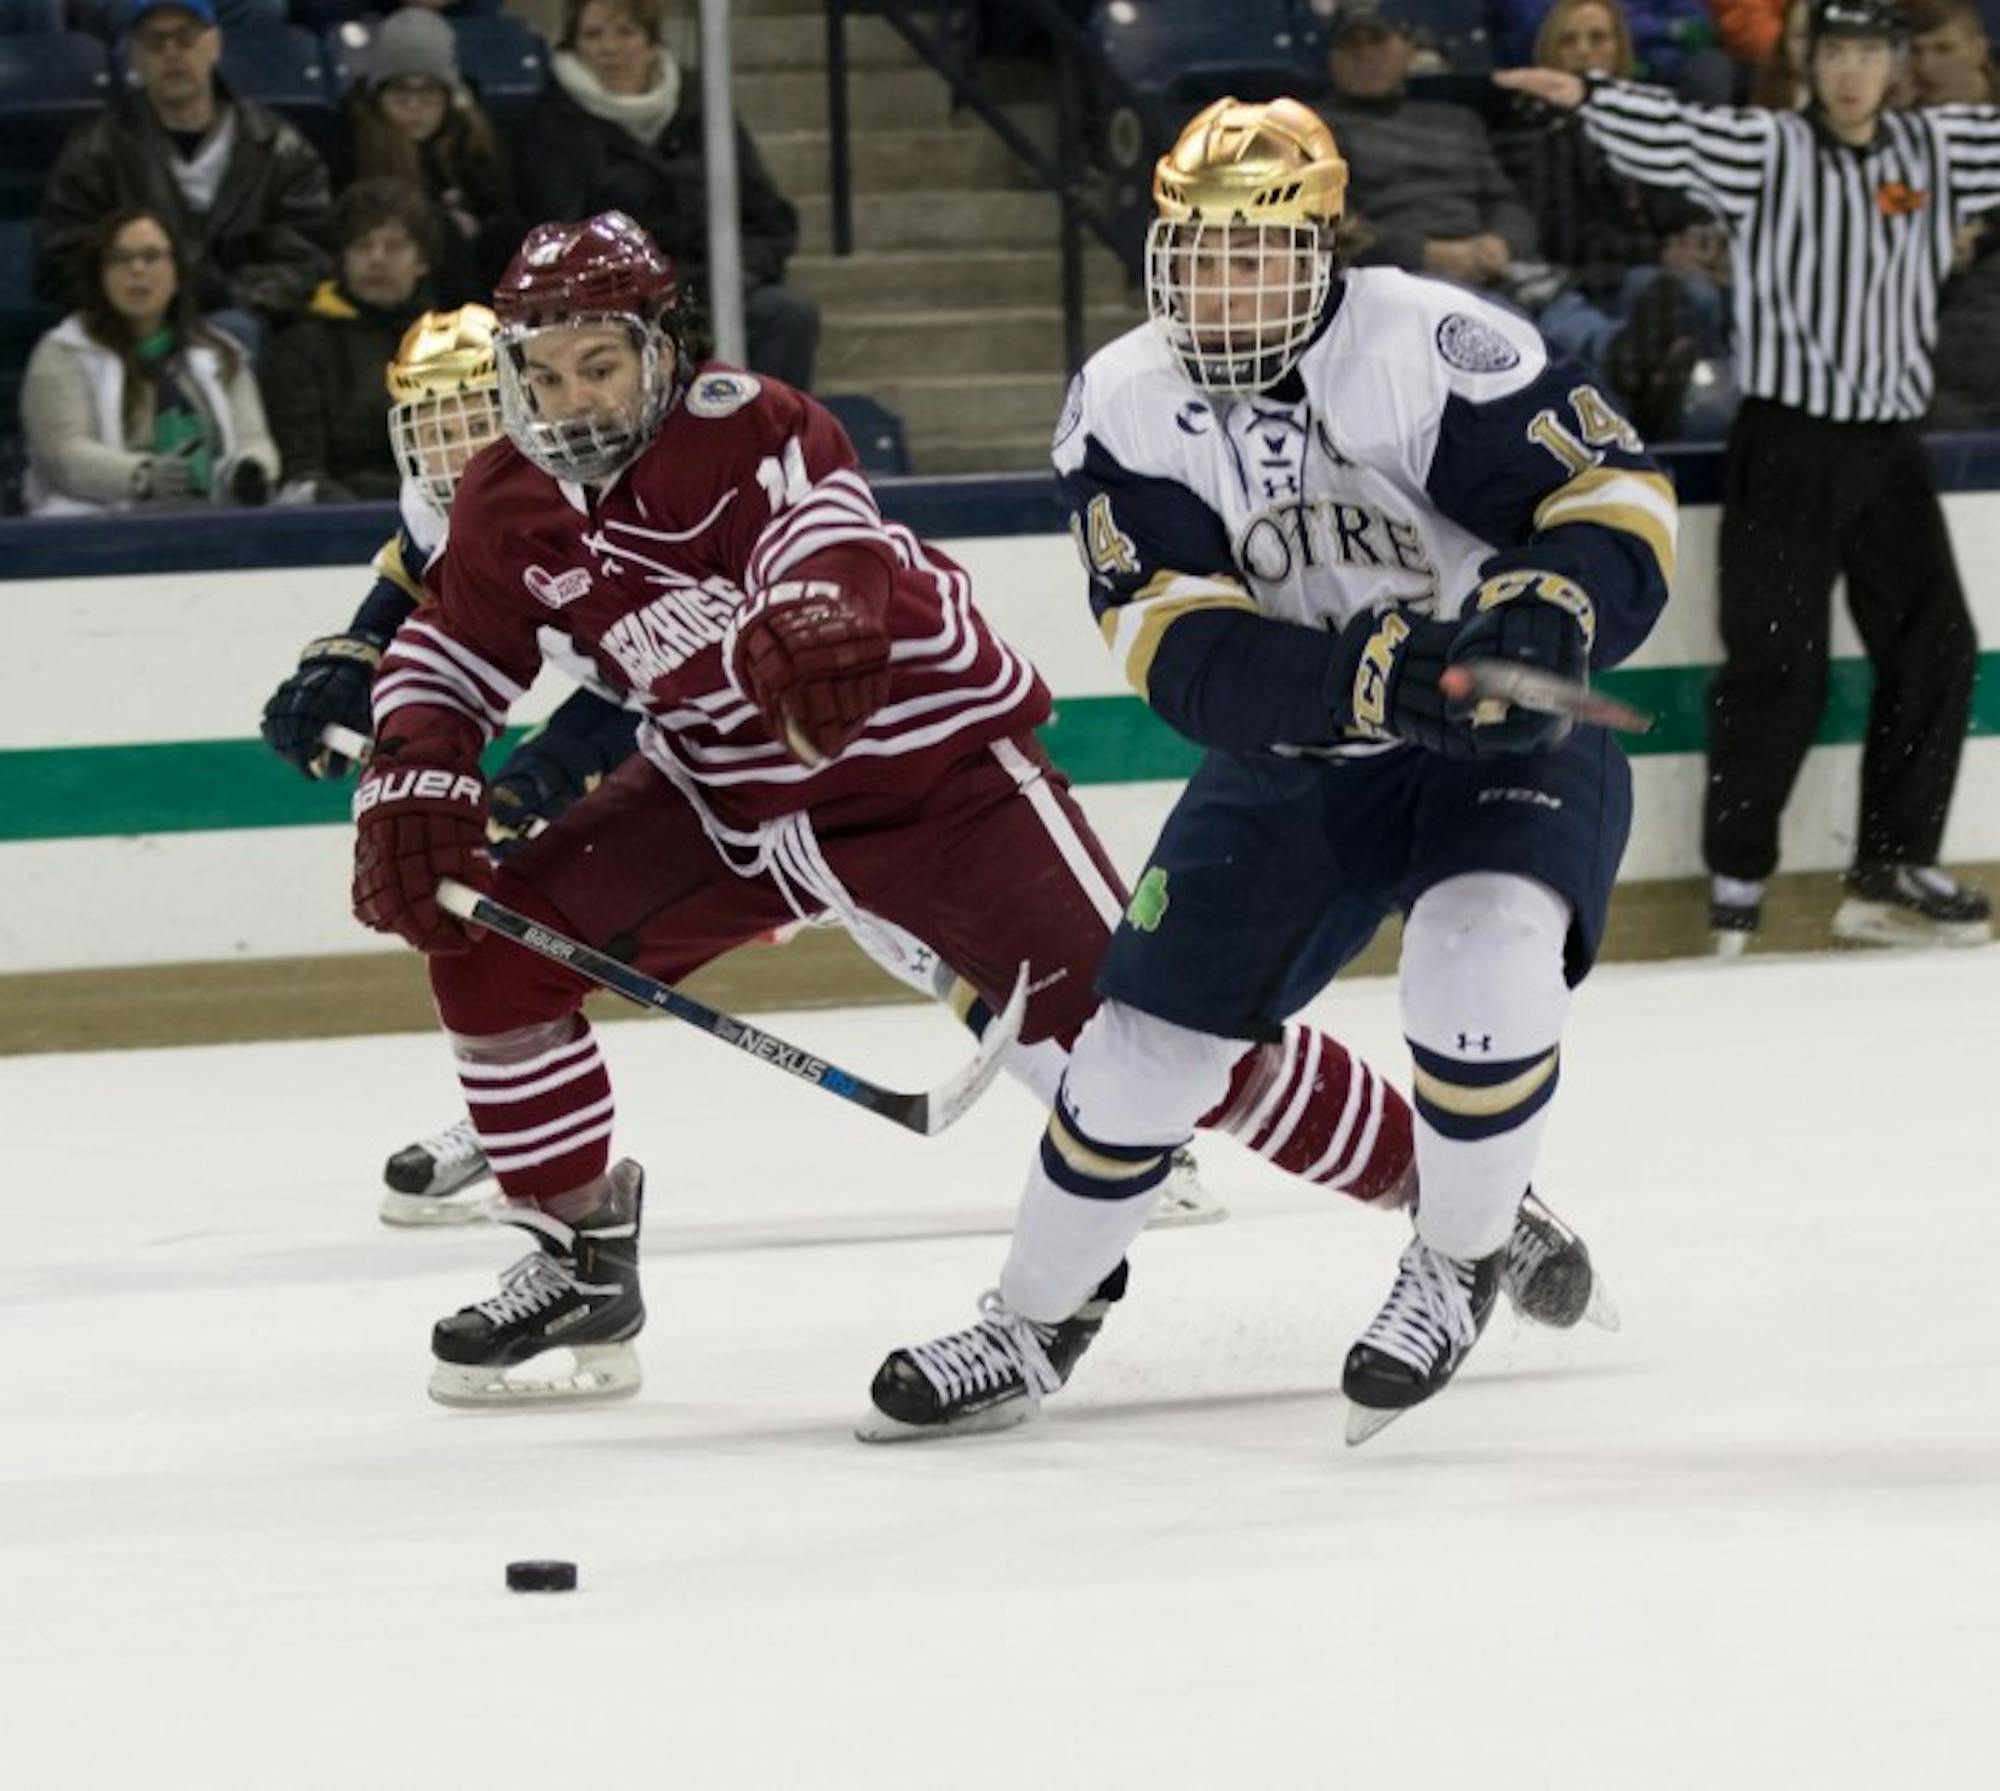 Irish senior center Thomas DiPauli races a UMass defender to the puck during Notre Dame’s 5-1 home  victory on Sunday. The Irish will take on Boston College on Thursday in Chestnut Hill, Massachusetts.